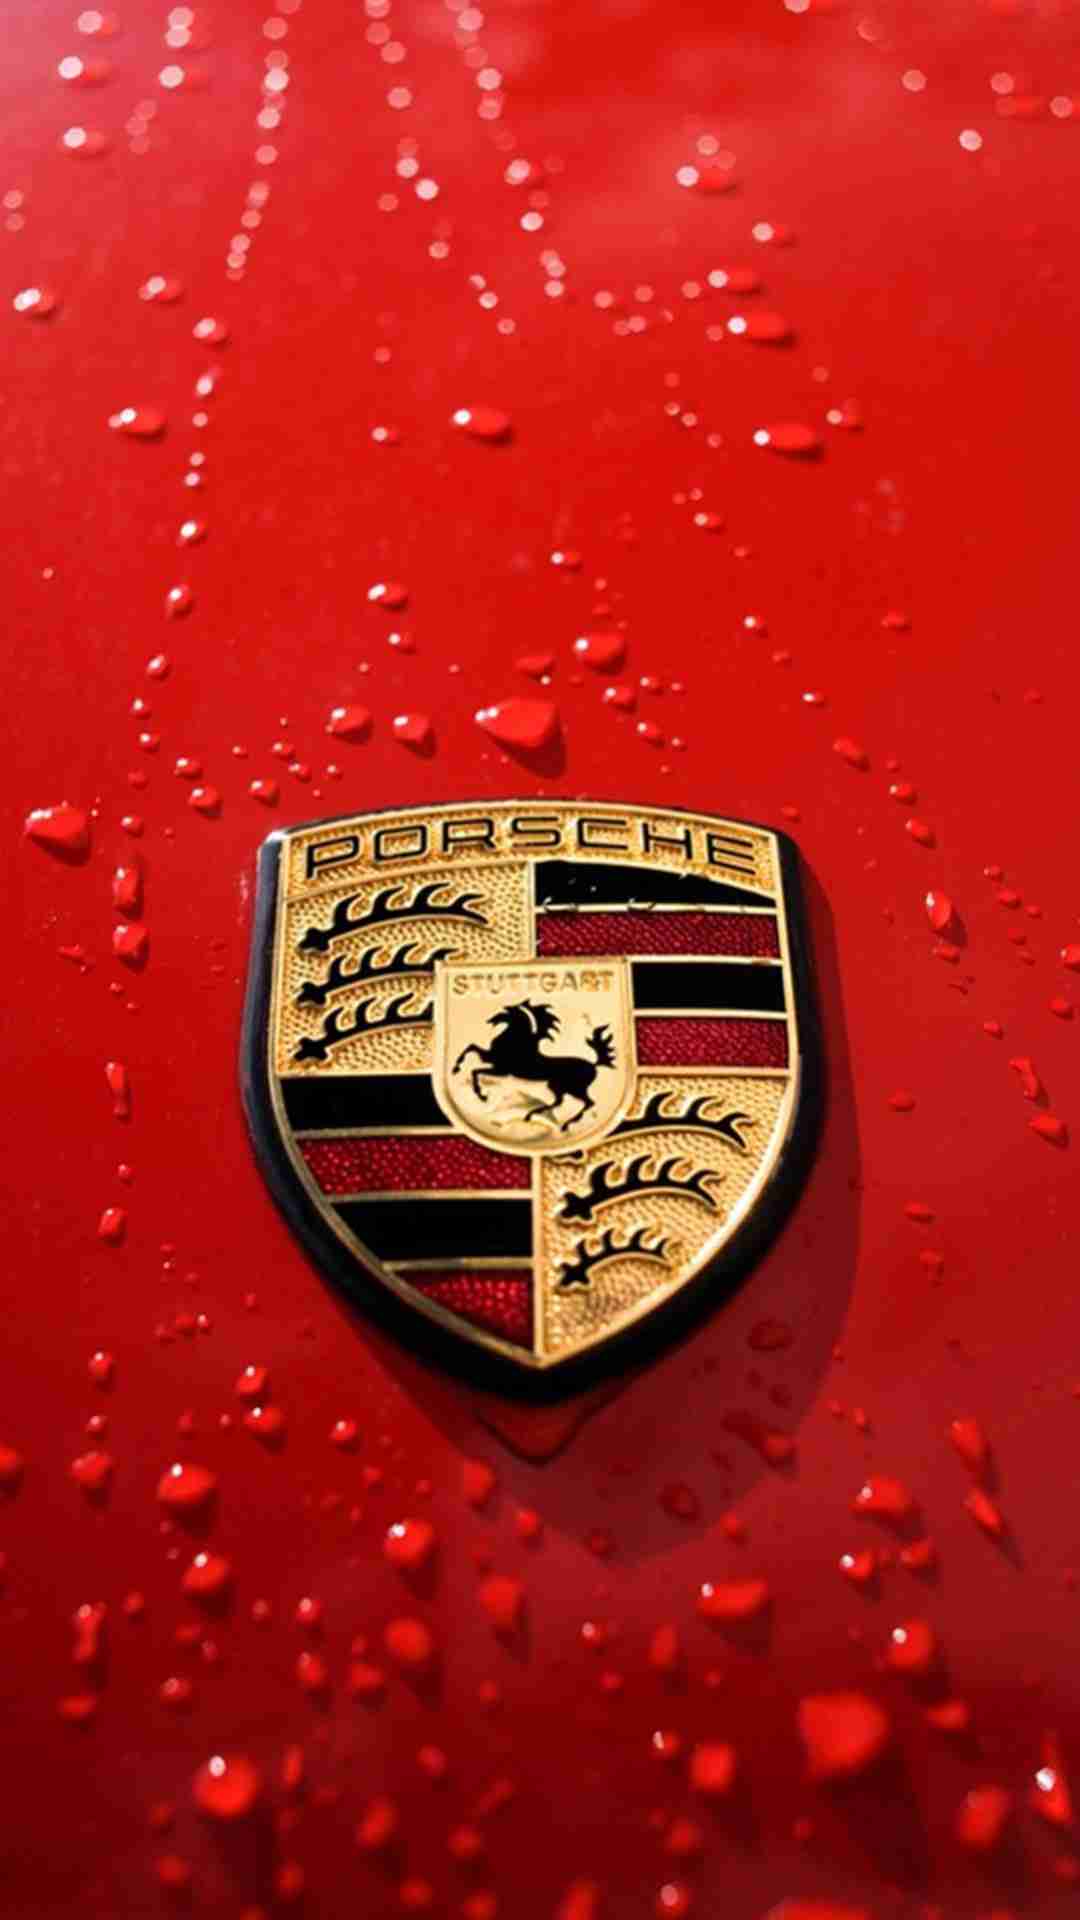 hd wallpapers for iphone 6s 1080p,red,vehicle,car,emblem,badge